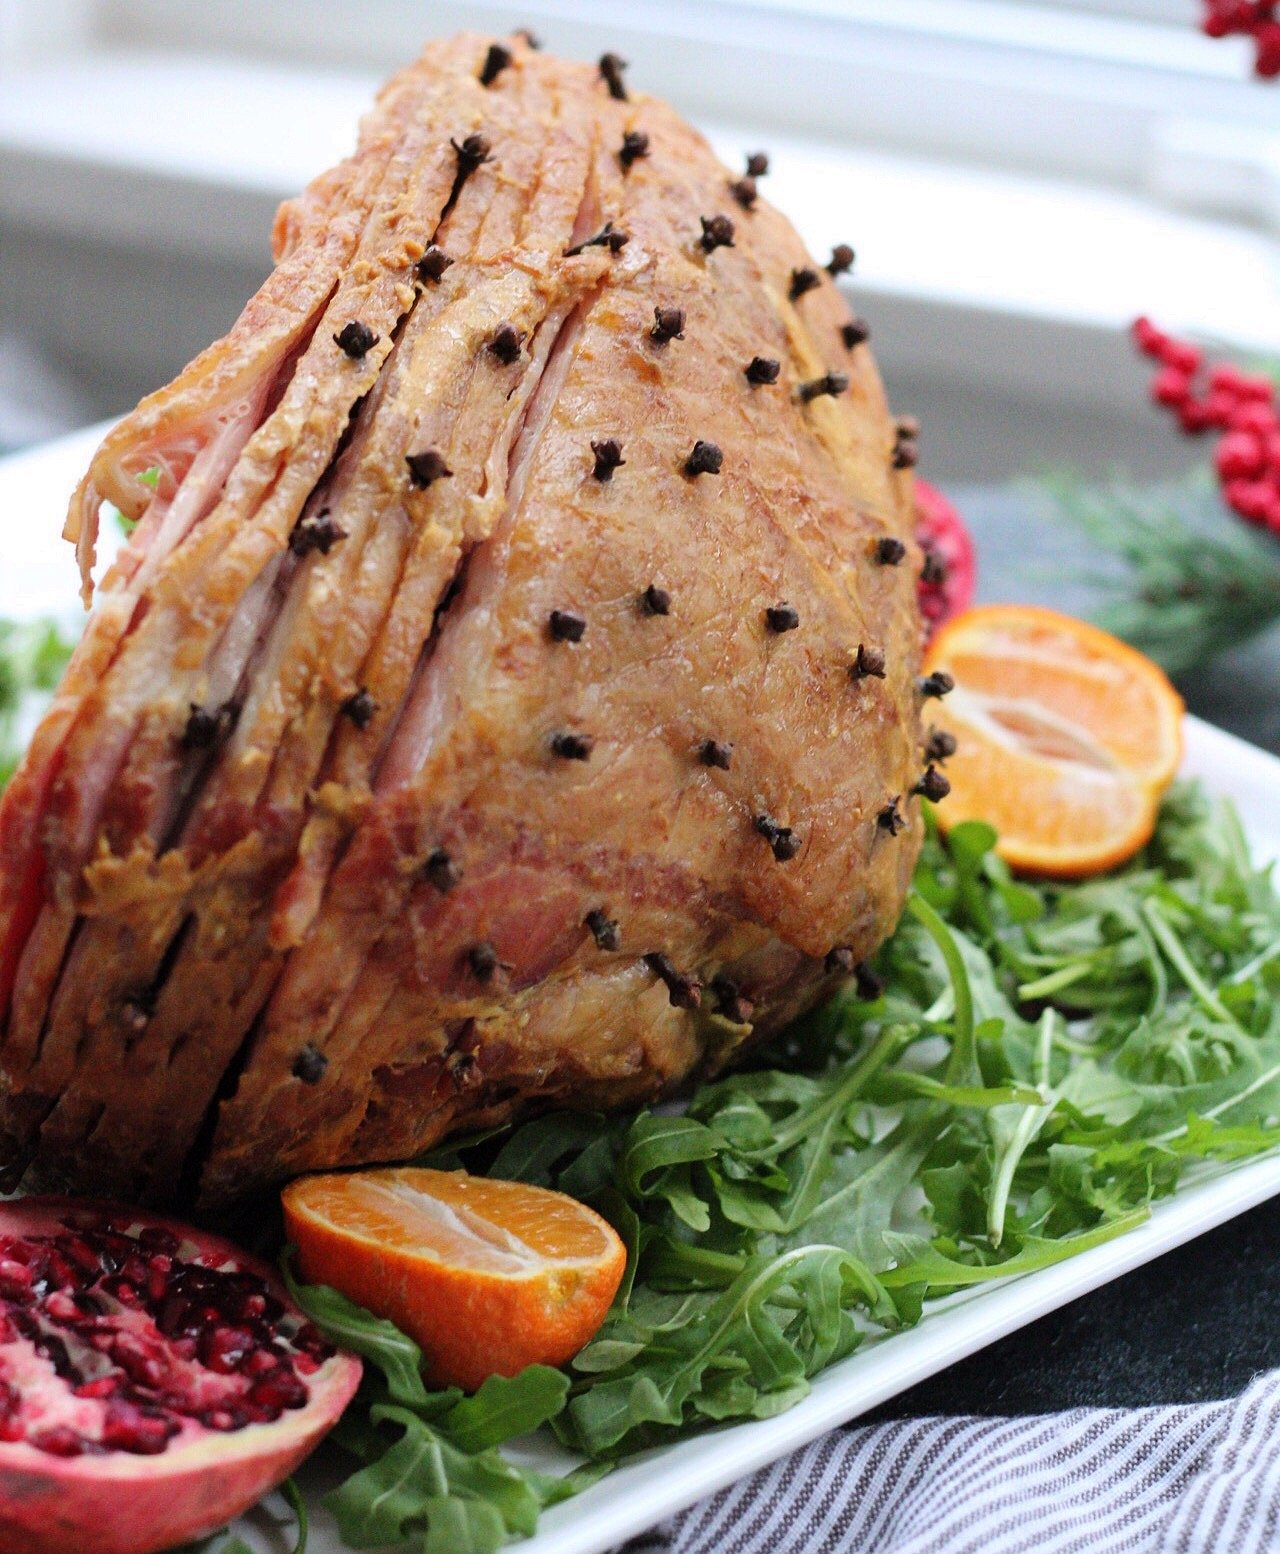 Three ingredient Whole30 holiday ham is a family friendly recipe everyone will enjoy. Made with a sugar free ham, this clean eating recipe will be a hit. With a simple recipe, it's quick and easy so you get in and out of the kitchen! #holidayham #paleoham #whole30ham #paleoholidayrecipes